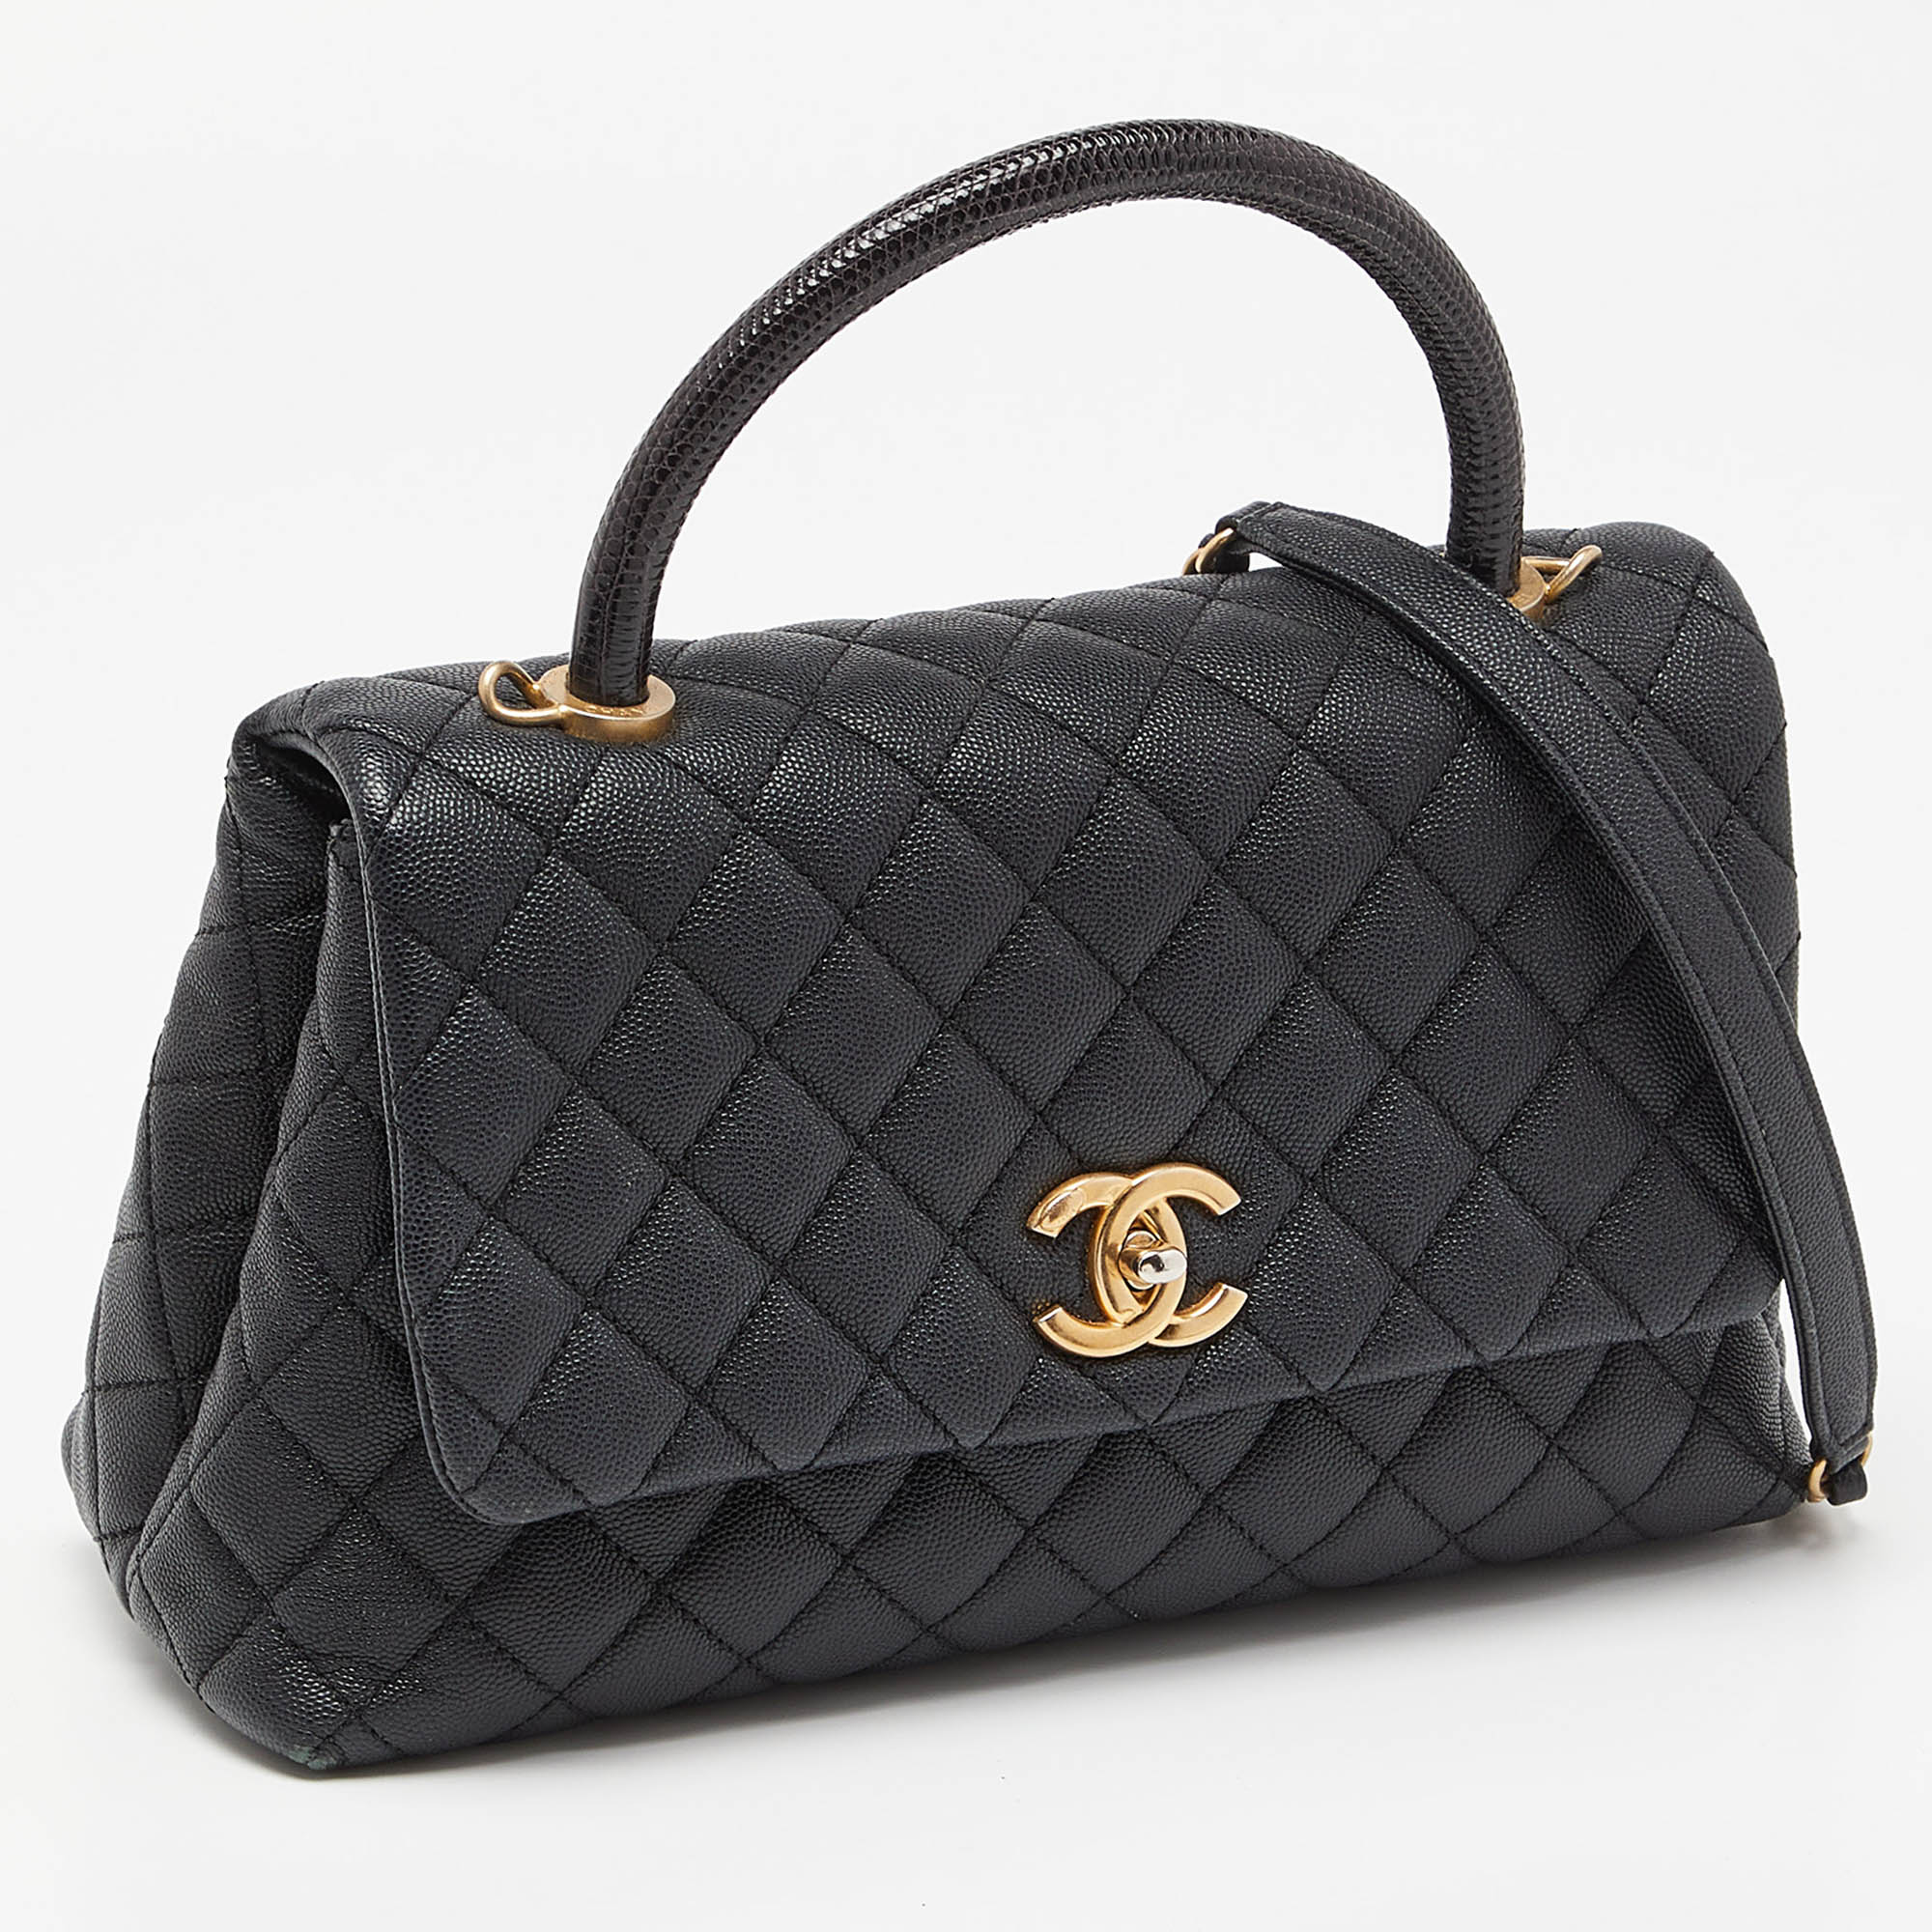 Chanel Black Quilted Caviar Leather And Lizard Handle Small Coco Top Handle Bag